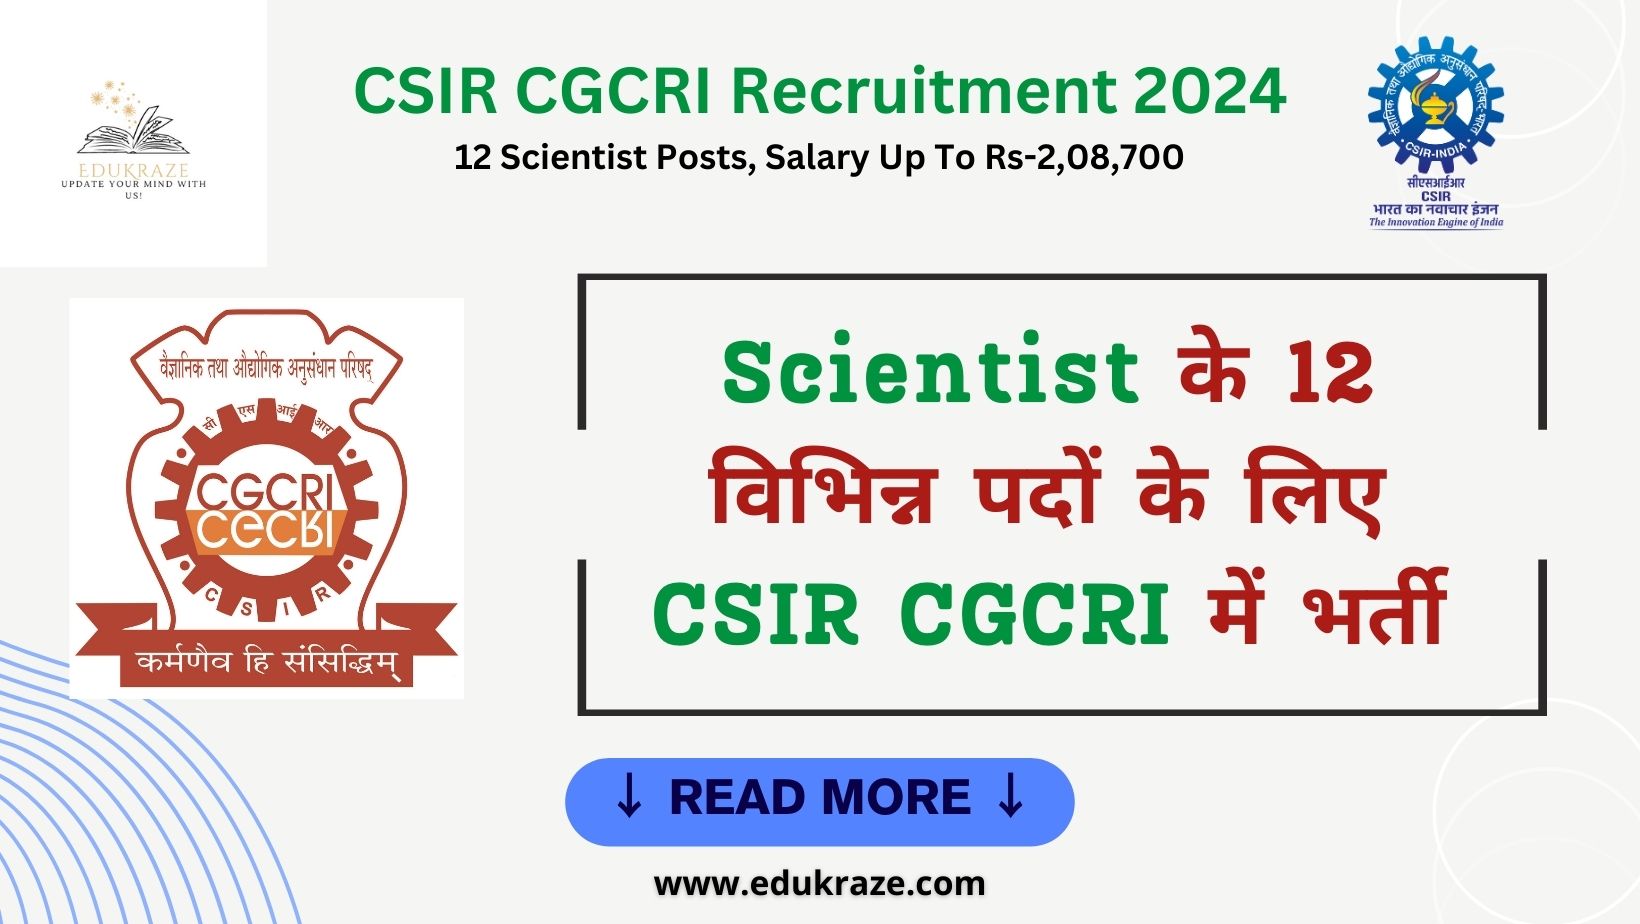 CSIR CGCRI Recruitment 2024 Out For 12 Scientist Posts, Salary Up To Rs-2,08,700